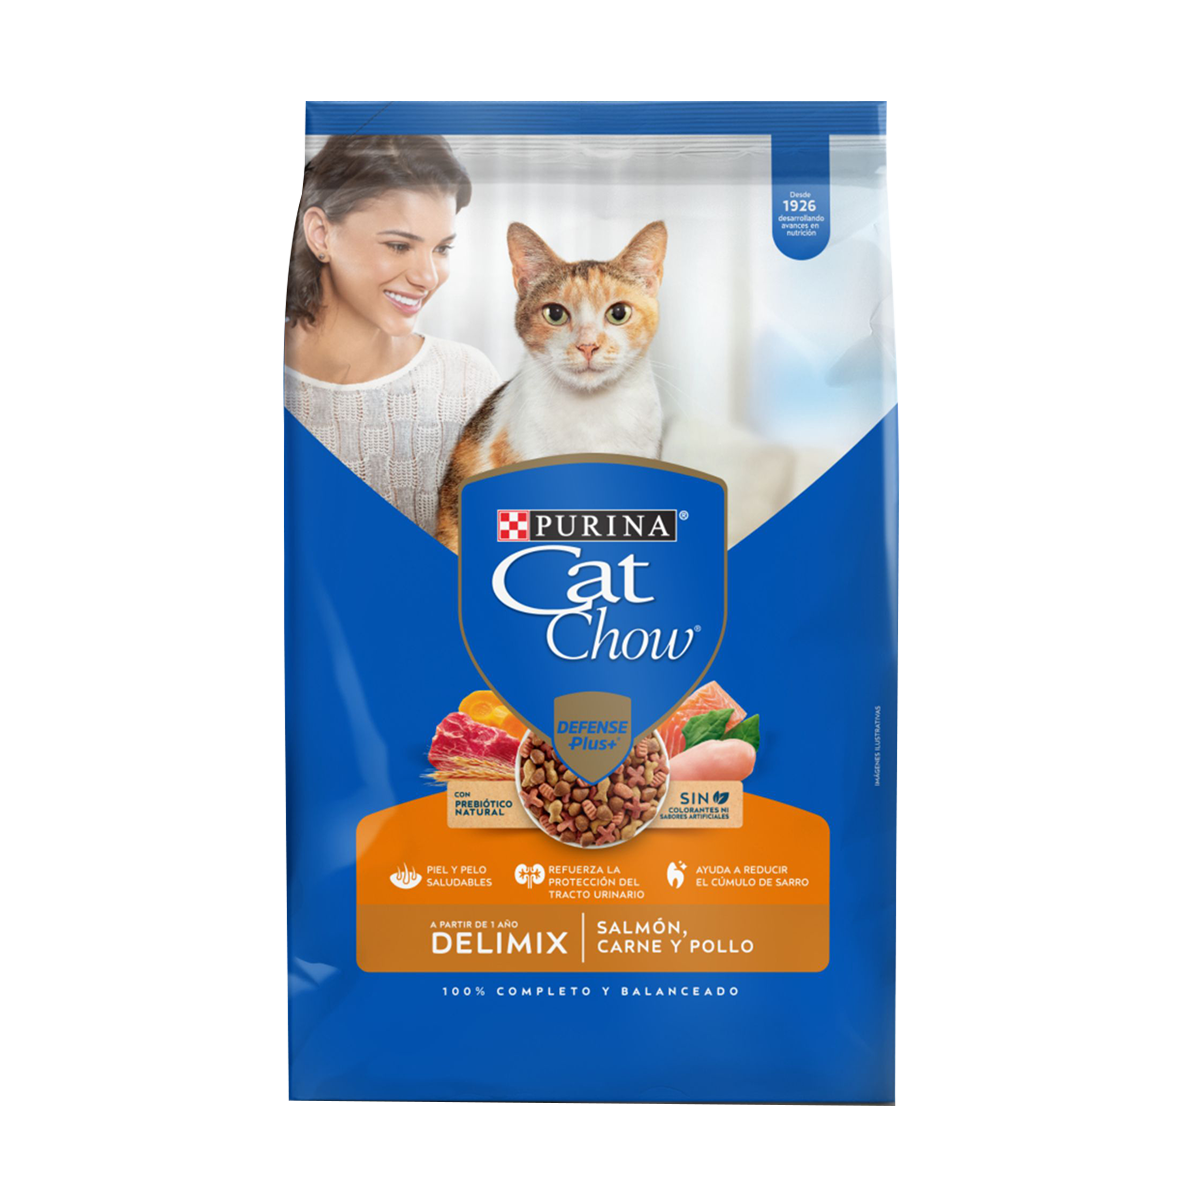 Purina-Cat-Chow-DRY-Delimix-adultos-01_0.png